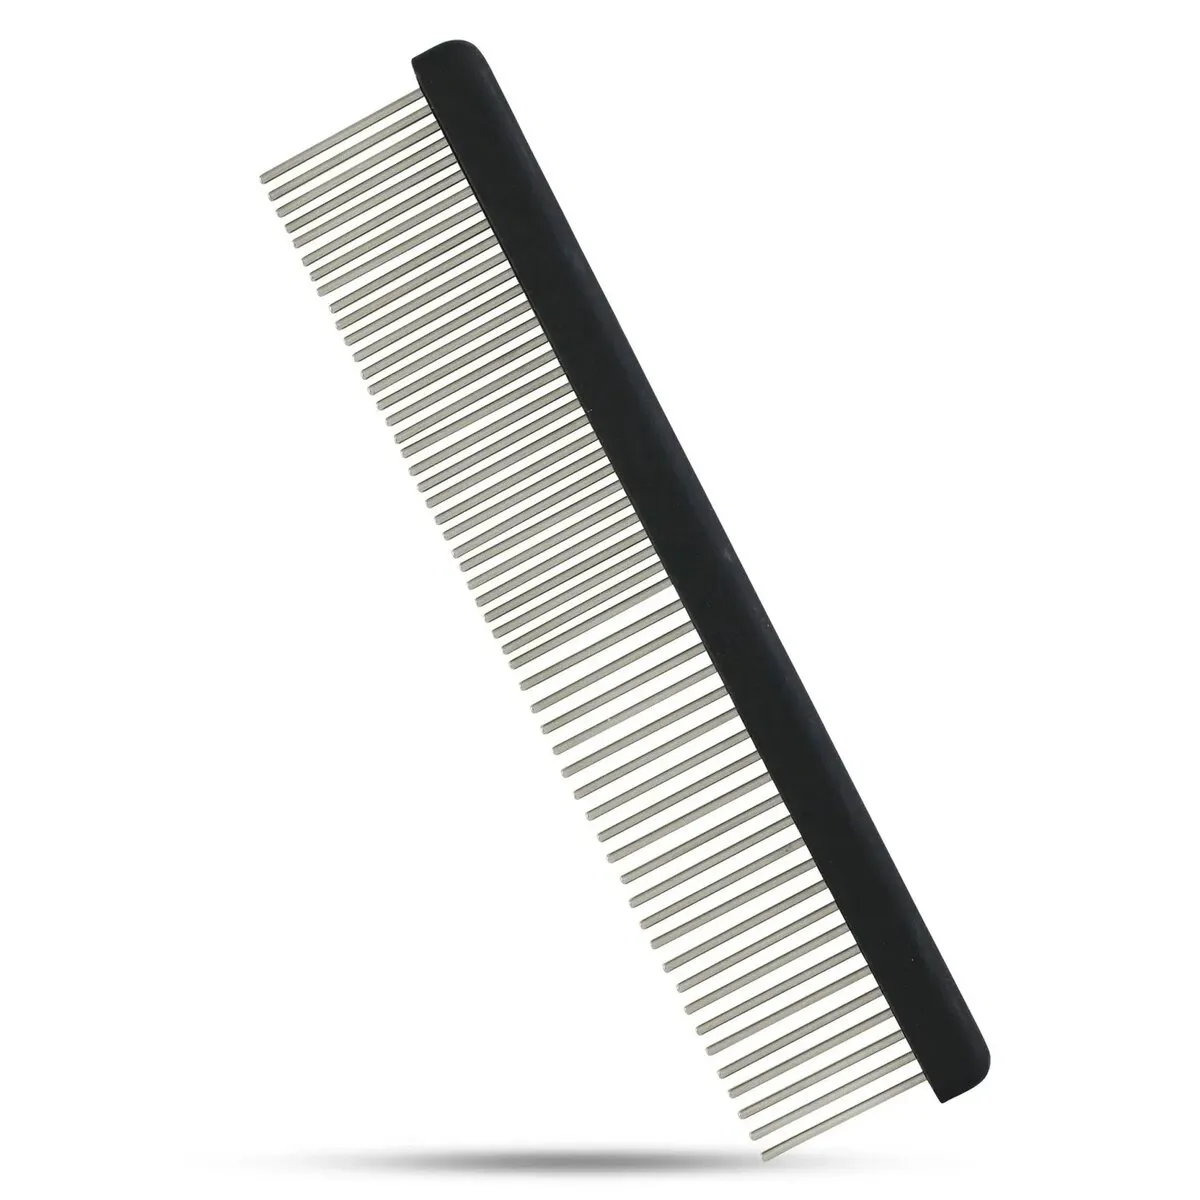 The Untangler - Professional Comb (54 Dual-spaced, 1.25" Extra-Long SS teeth) – deep clean coat with ease! (T777PX)